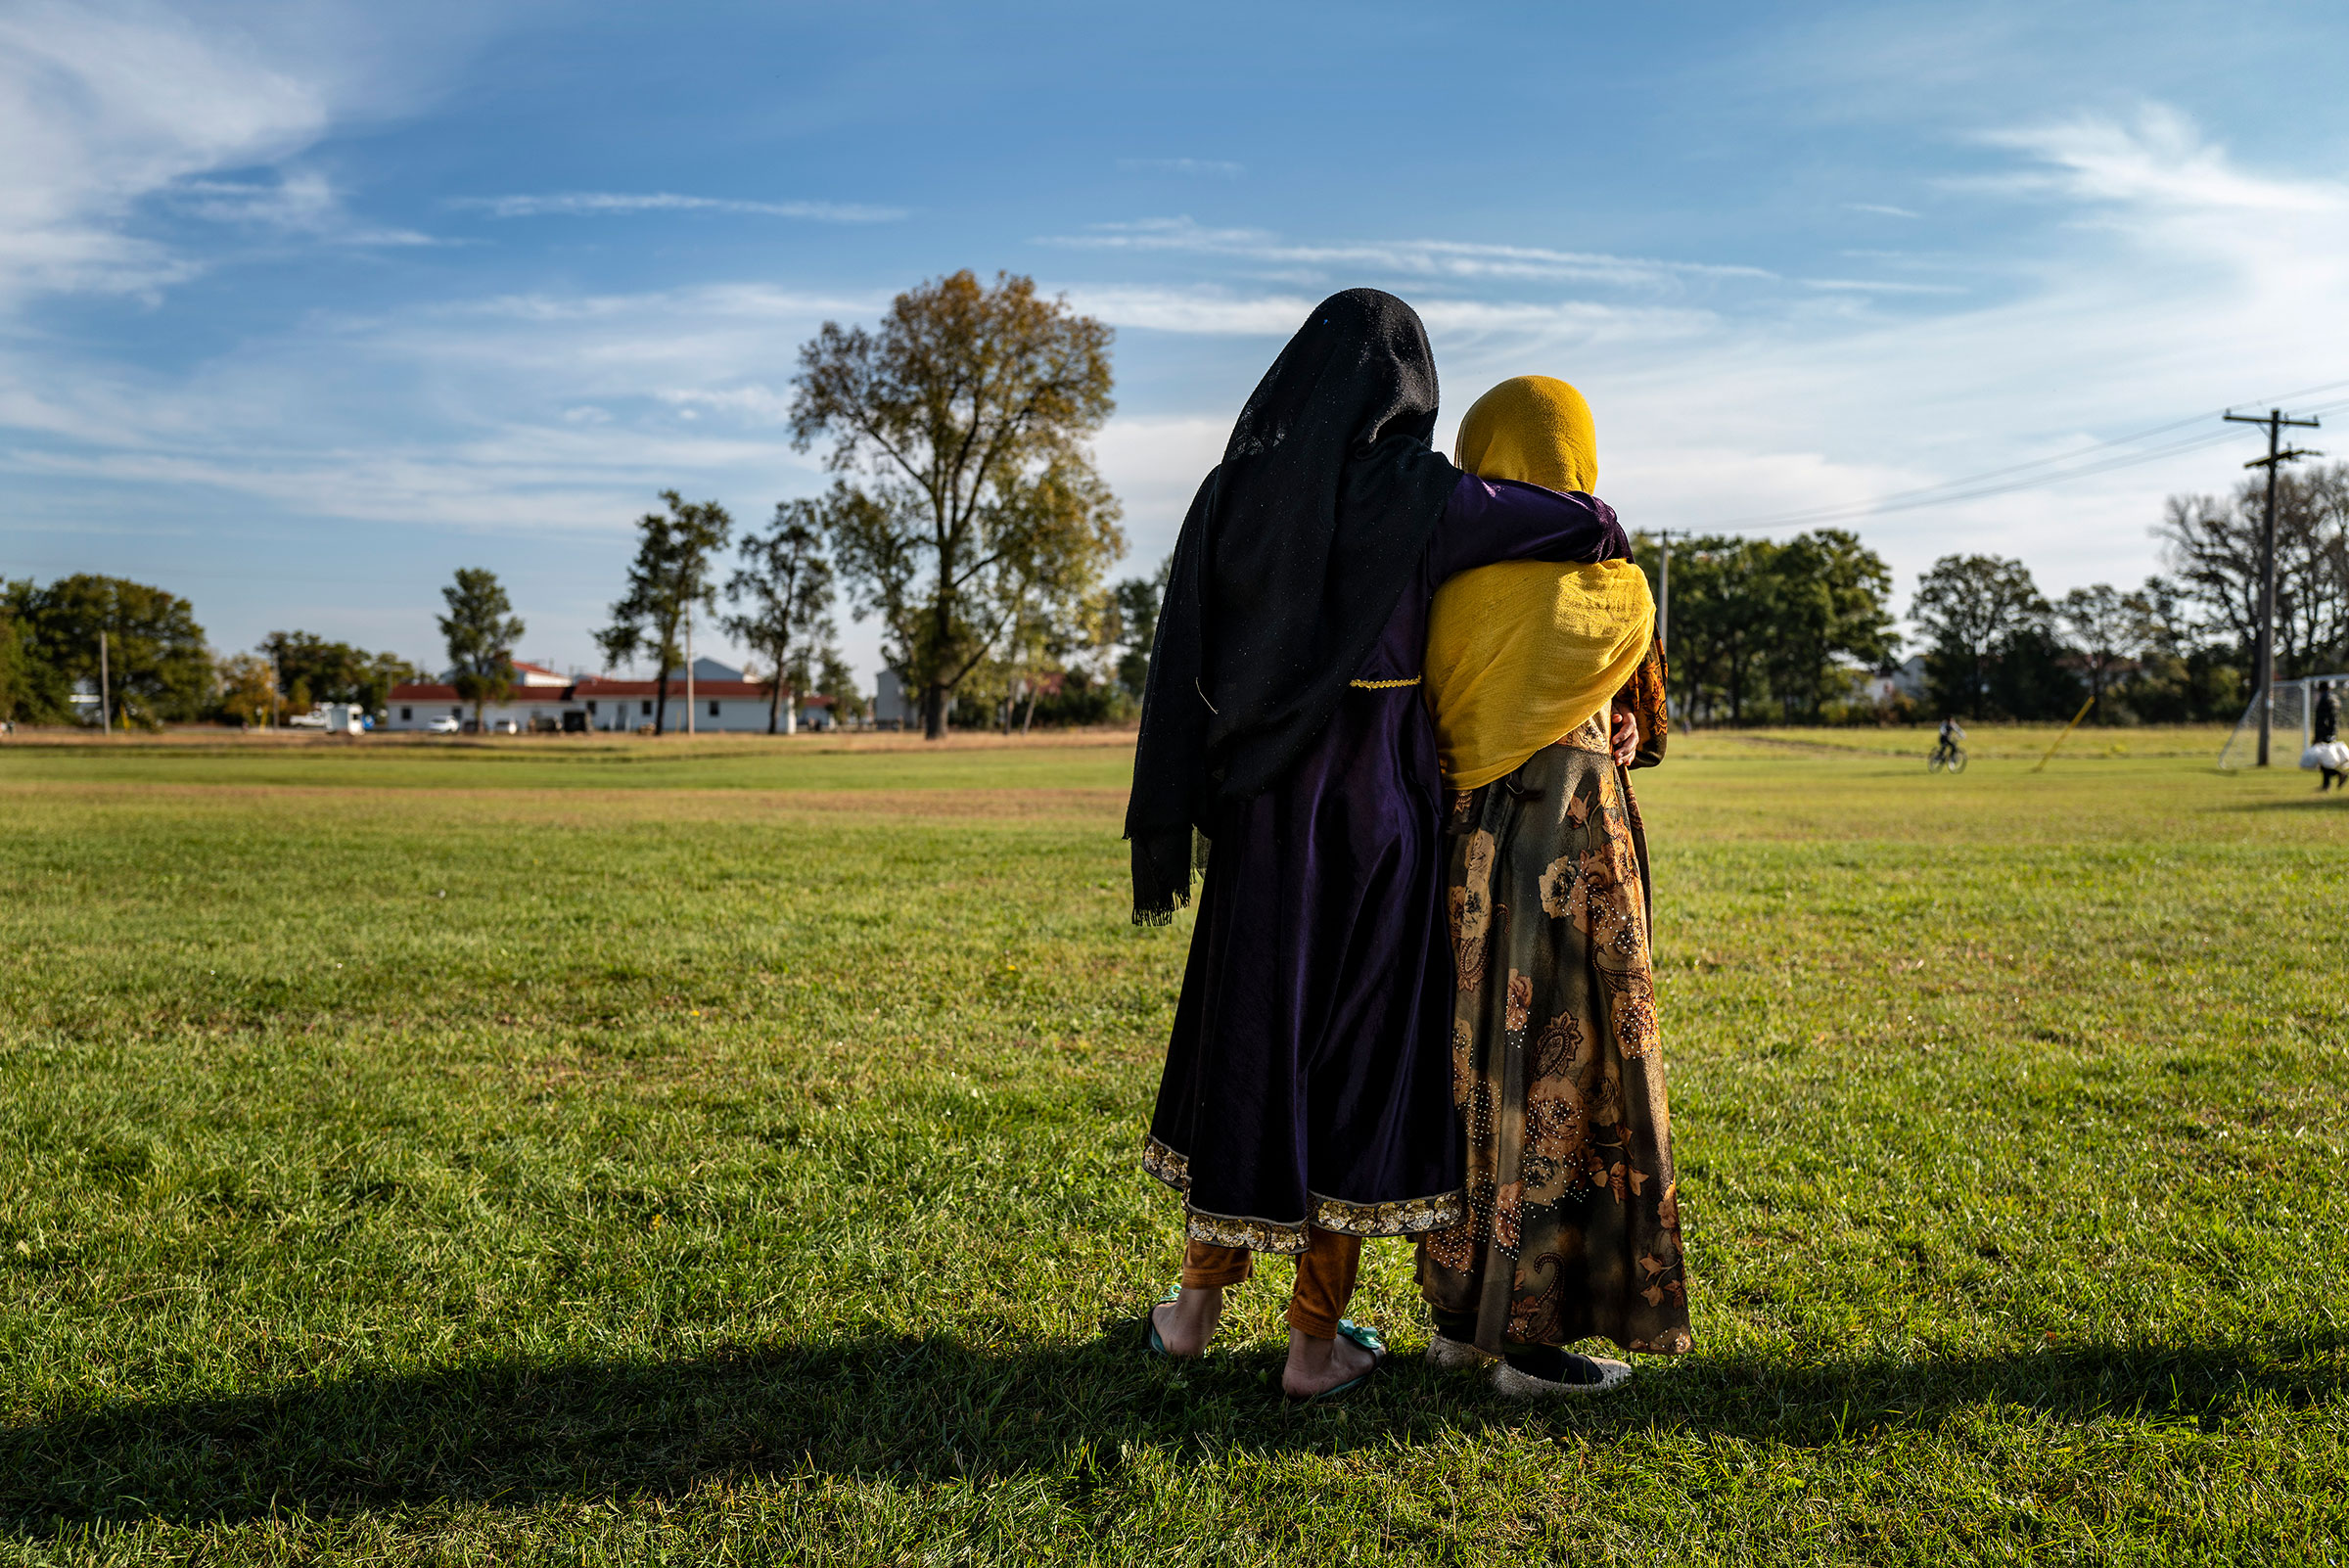 Afghan refugee girls watch a soccer match near where they are staying in the Village at the Ft. McCoy U.S. Army base on September 30, 2021 in Ft. McCoy, Wisconsin. There are approximately 12,600 Afghan refugees at the base under Operation Allies Welcome. (Barbara Davidson—Getty Images)